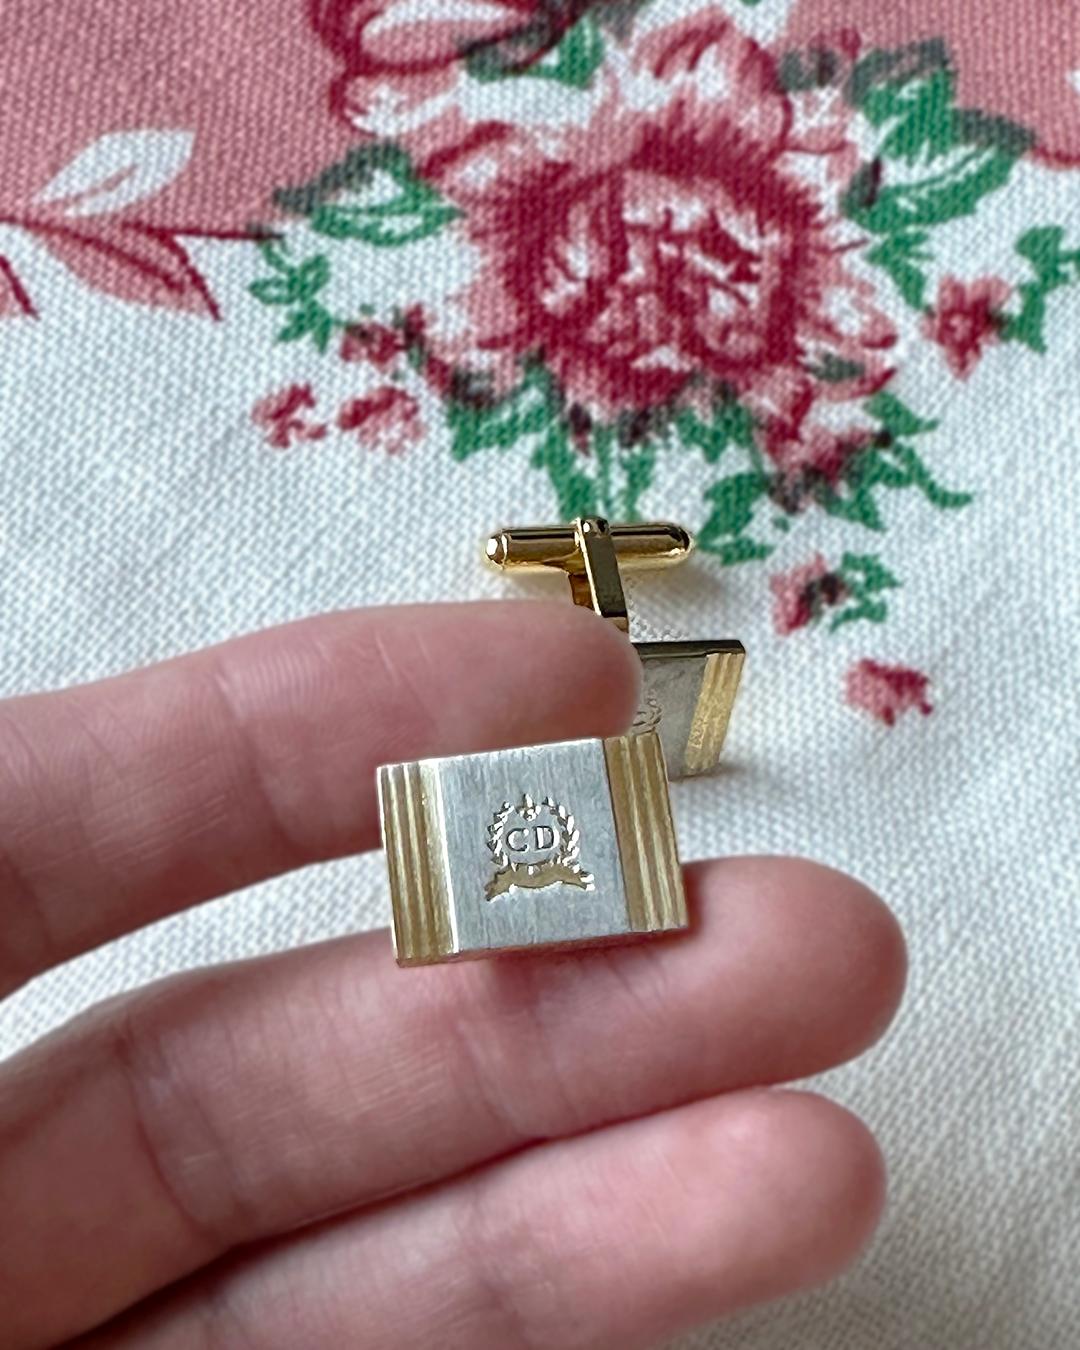 VERY BREEZY presents: These vintage Christian Dior cufflinks are such a one-of-a-kind gift— or gift for yourself! I love the crest design, with the CD logo in the center. It gives a royal vibe! They are both silver and gold, making them especially